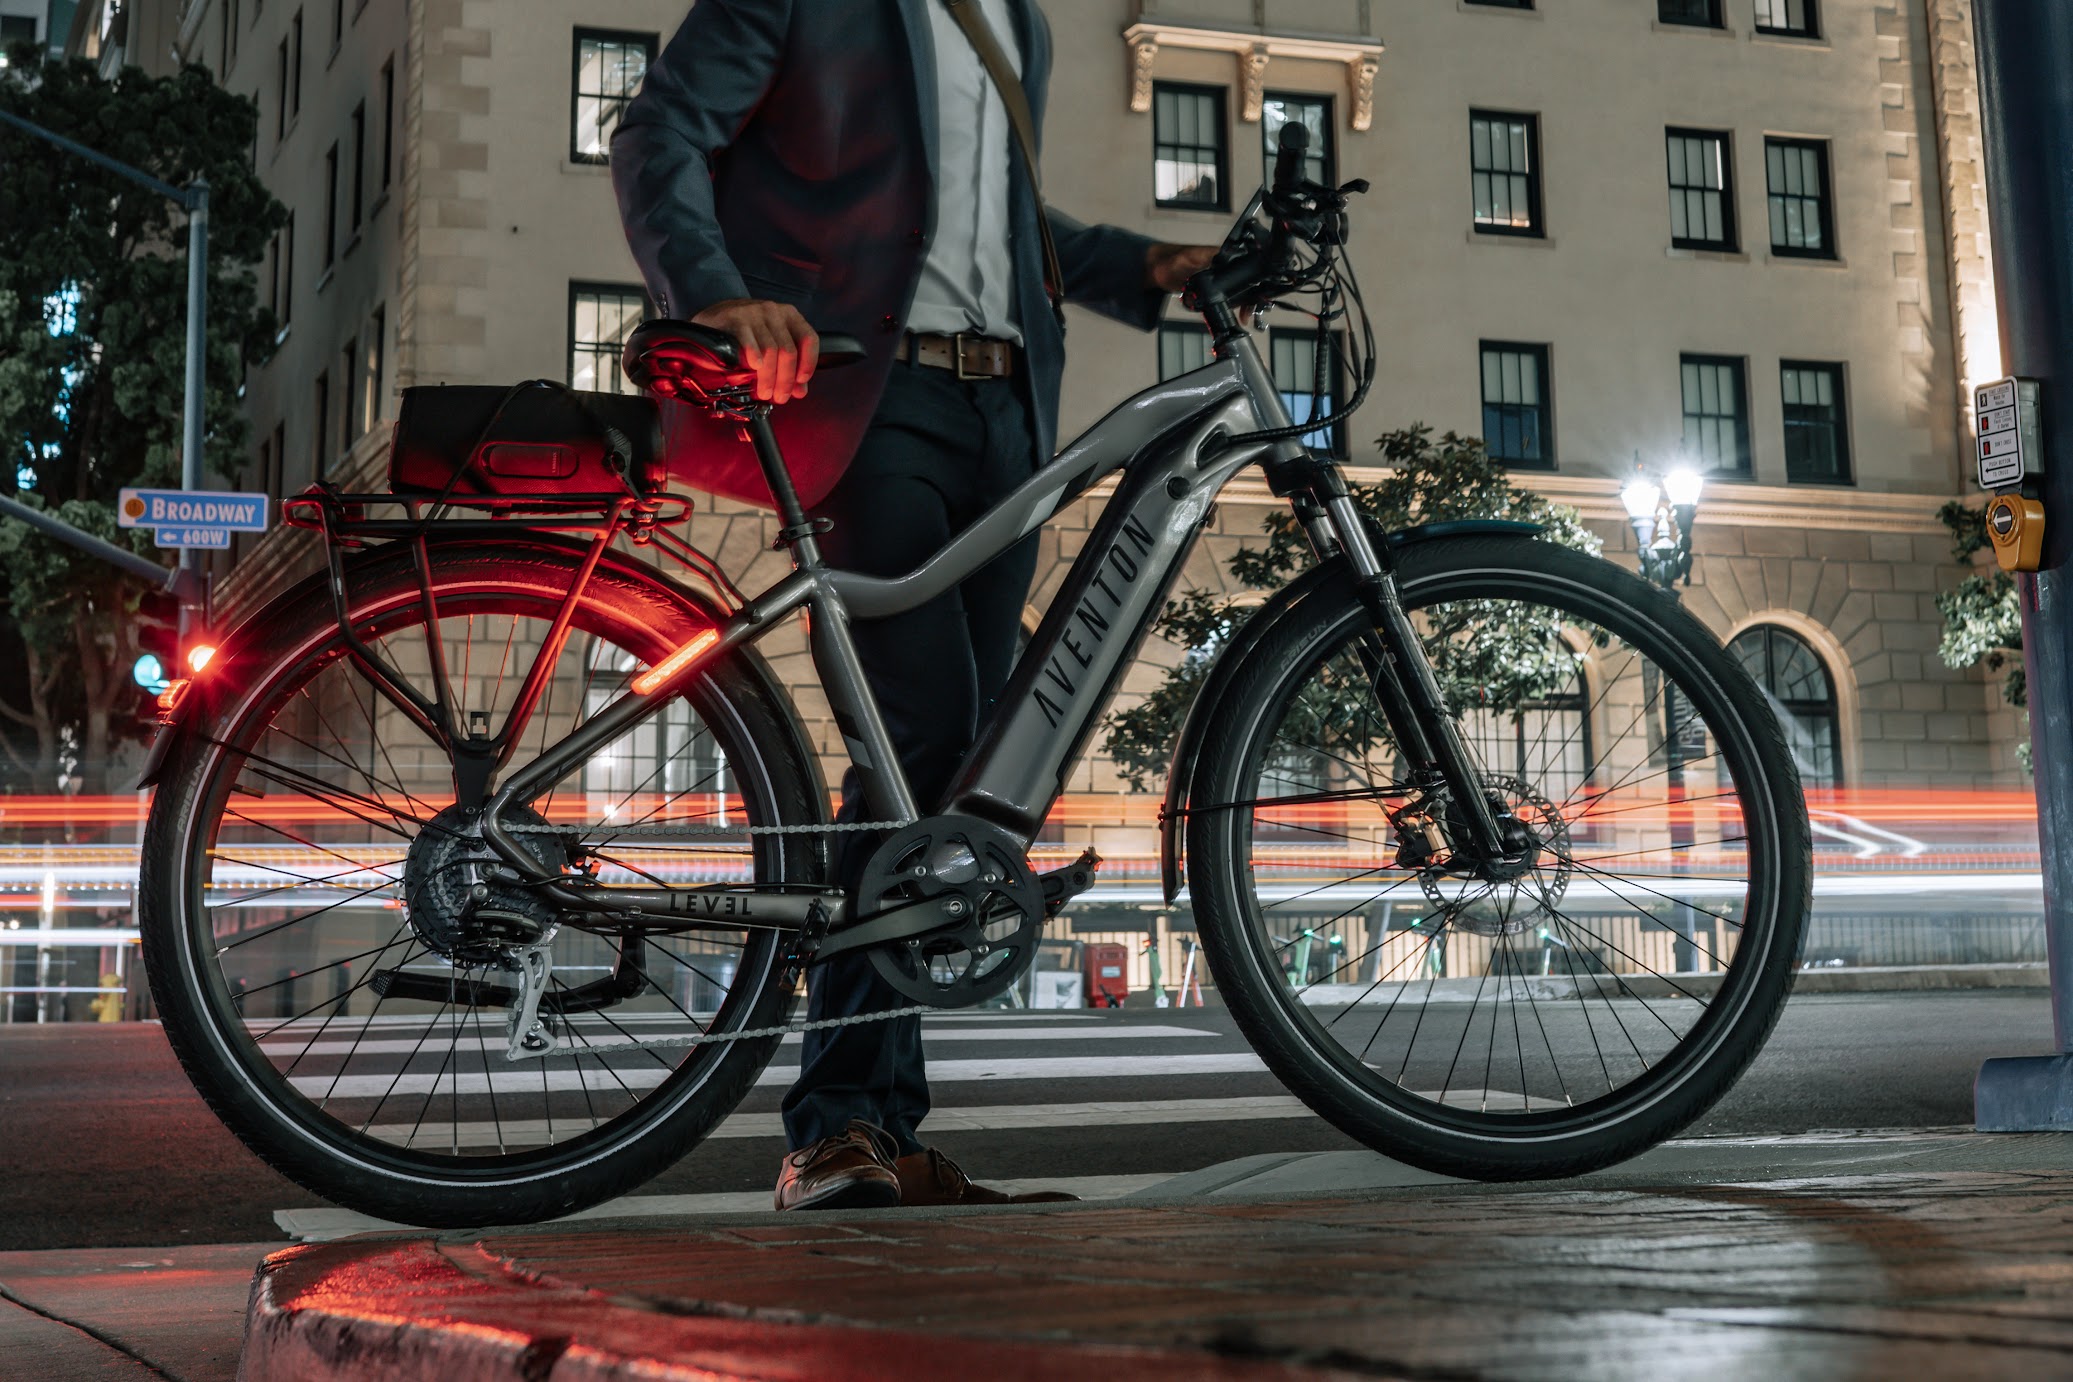 Aventon Level 2 bicycle with integrated taillights shining at night.